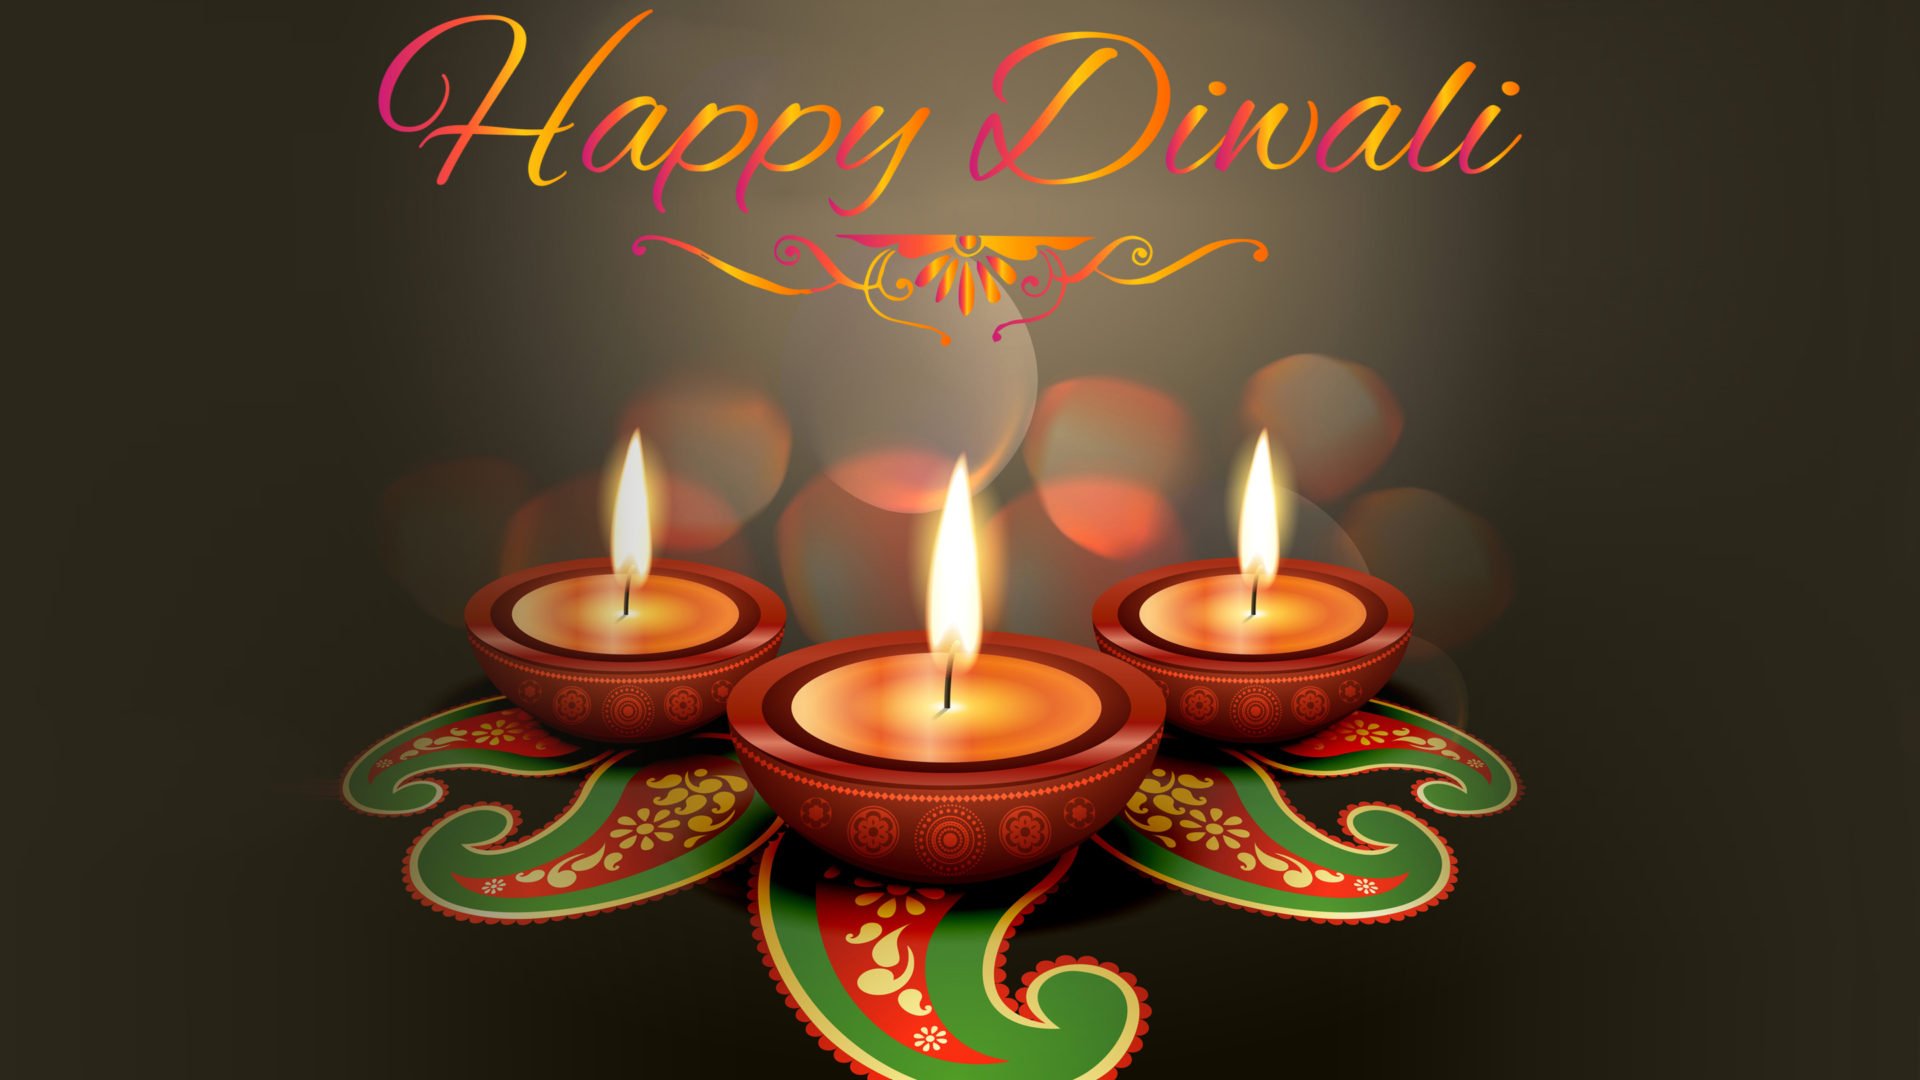 Happy Diwali 2022 Quotes Wishes Greetings Image HD Wallpaper 1920x1080, Wallpaper13.com